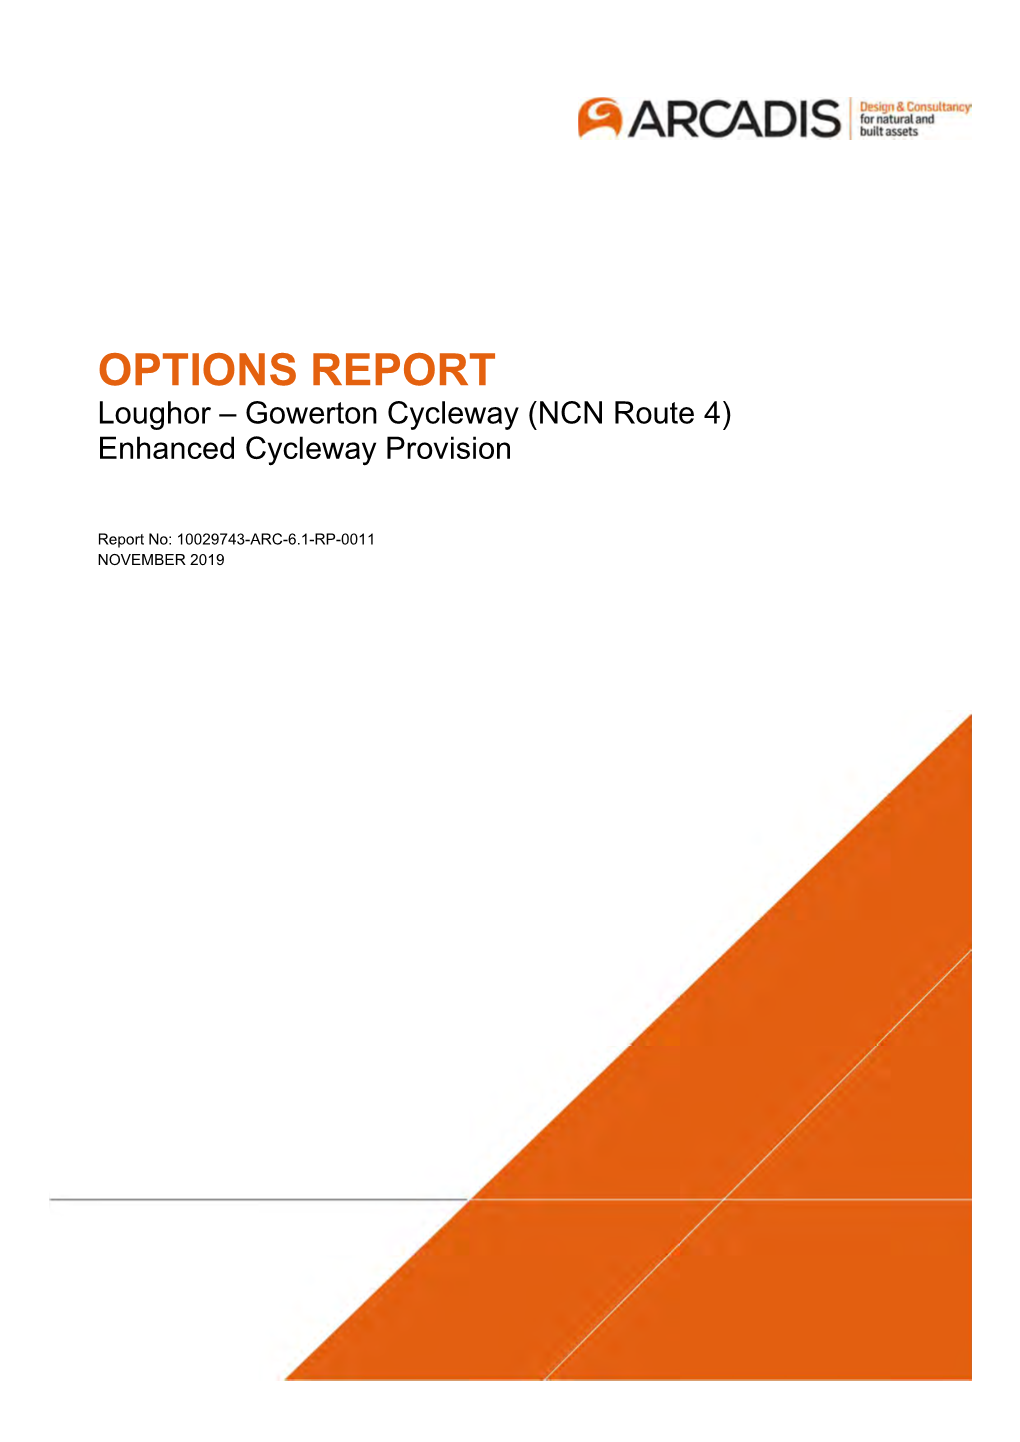 OPTIONS REPORT Loughor – Gowerton Cycleway (NCN Route 4) Enhanced Cycleway Provision